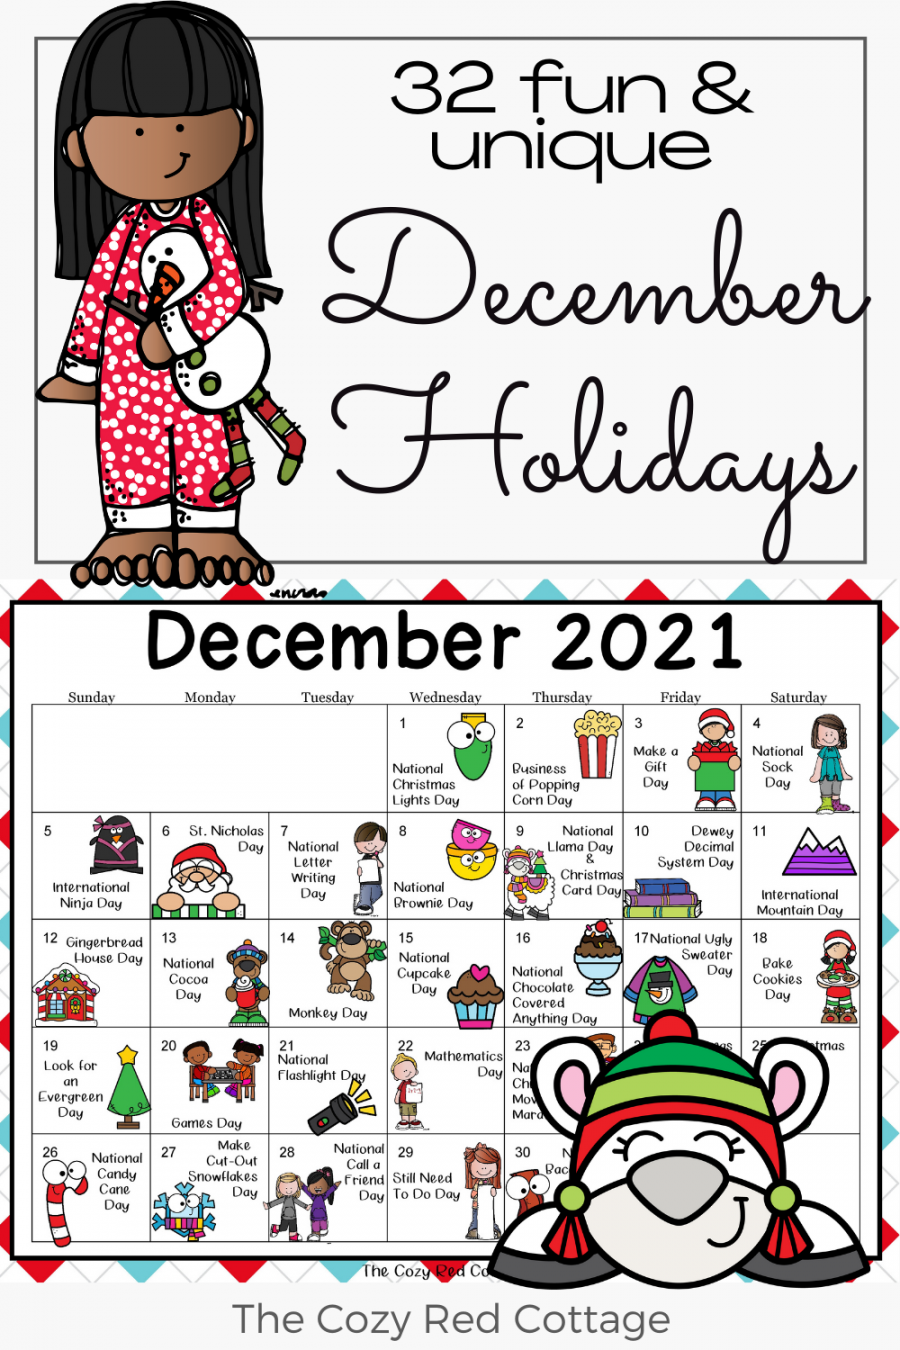 The Cozy Red Cottage: December Holiday Calendar